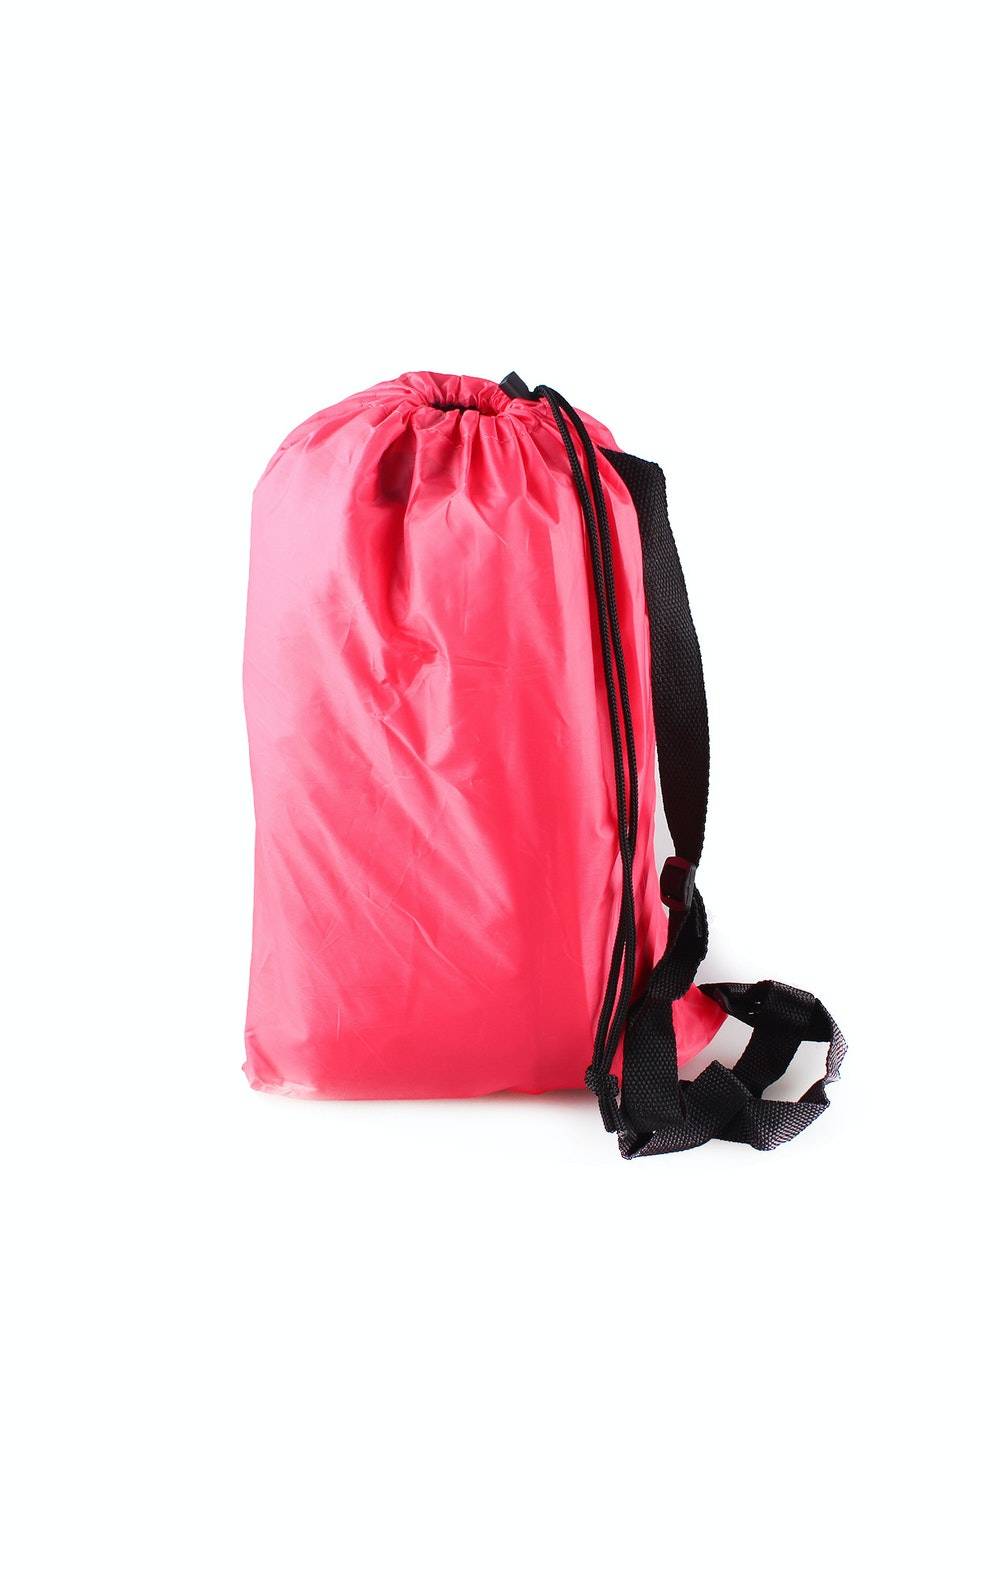 Onepiece Inflatable Lounge Bag Rose  - 2